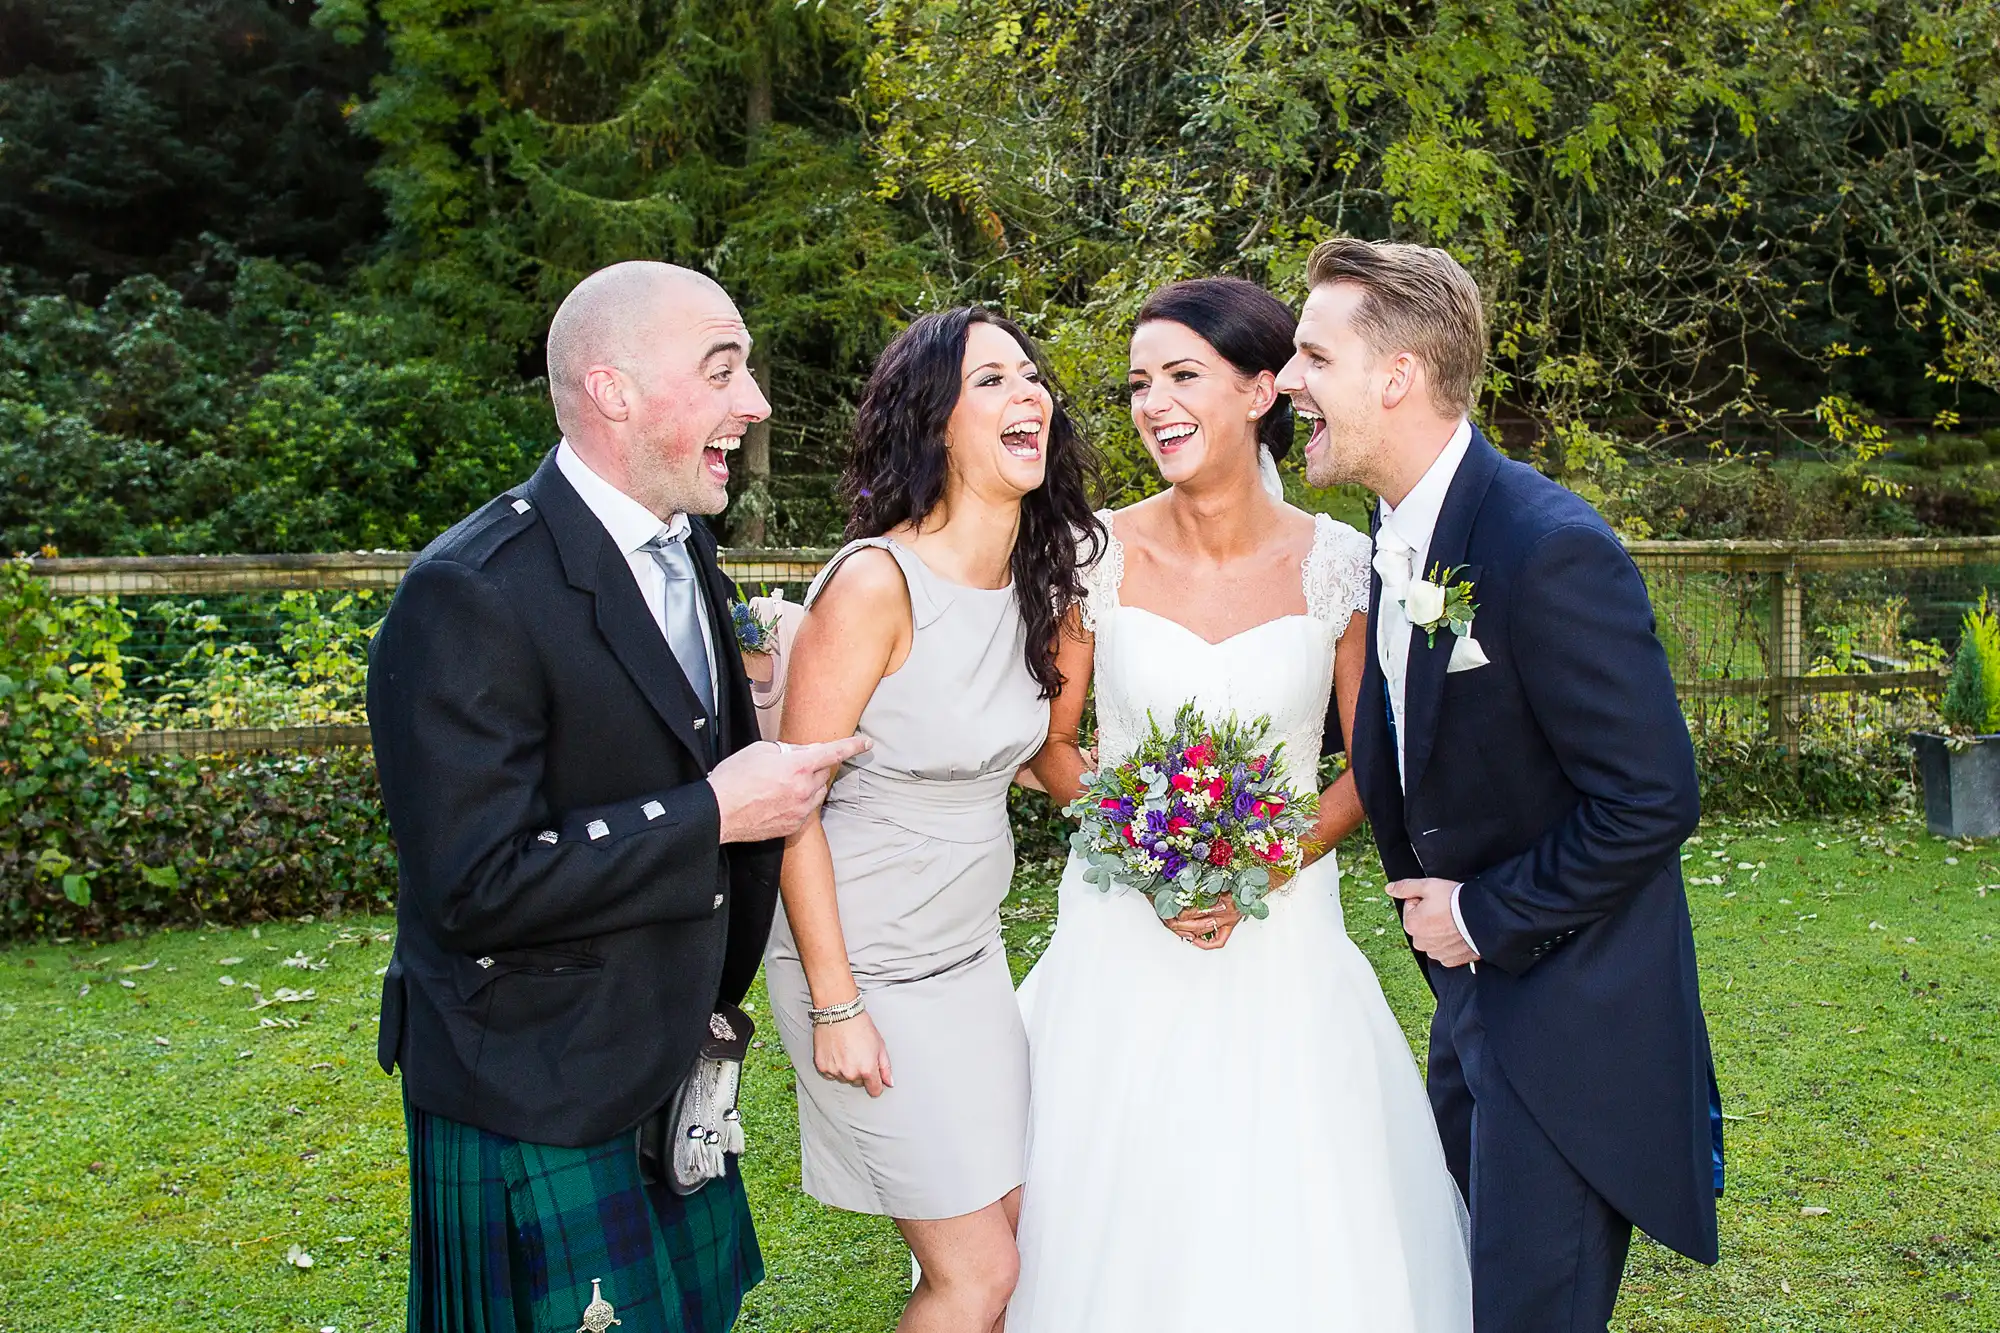 A joyful wedding group outdoors, featuring a laughing couple in traditional and modern wedding attire, joined by two happy friends.